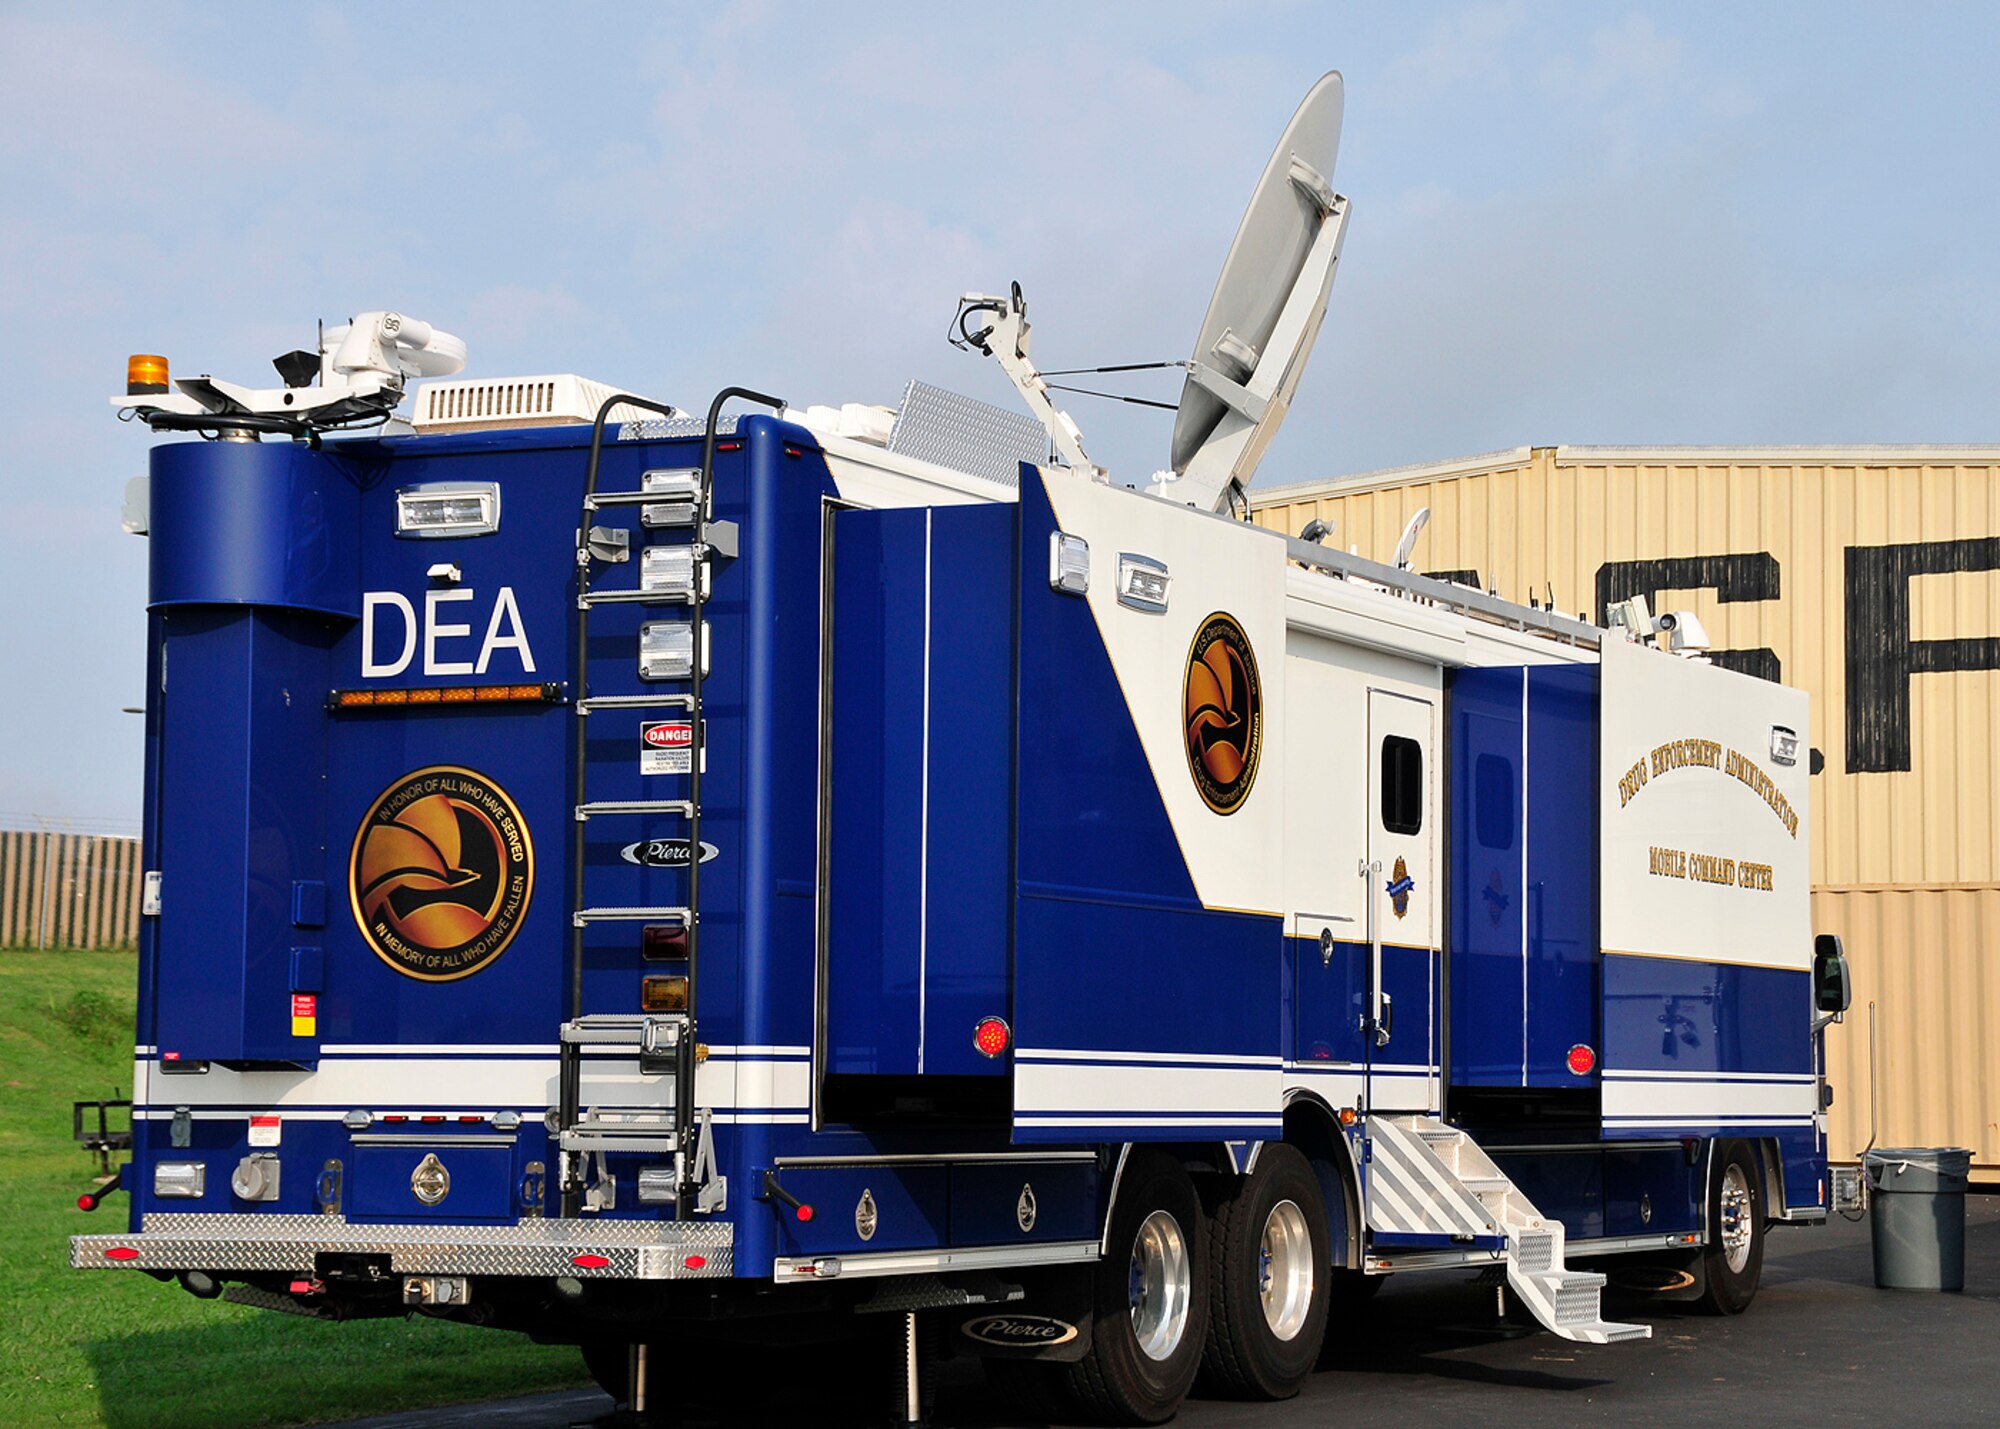 A mobile command post was recently deployed to McGhee Tyson Air National Guard Base, TN as part of the DEA aviation division's ERAD program.  (U.S. Air National Guard photo illustration by Master Sgt. Kendra M. Owenby, 134 ARW Public Affairs)